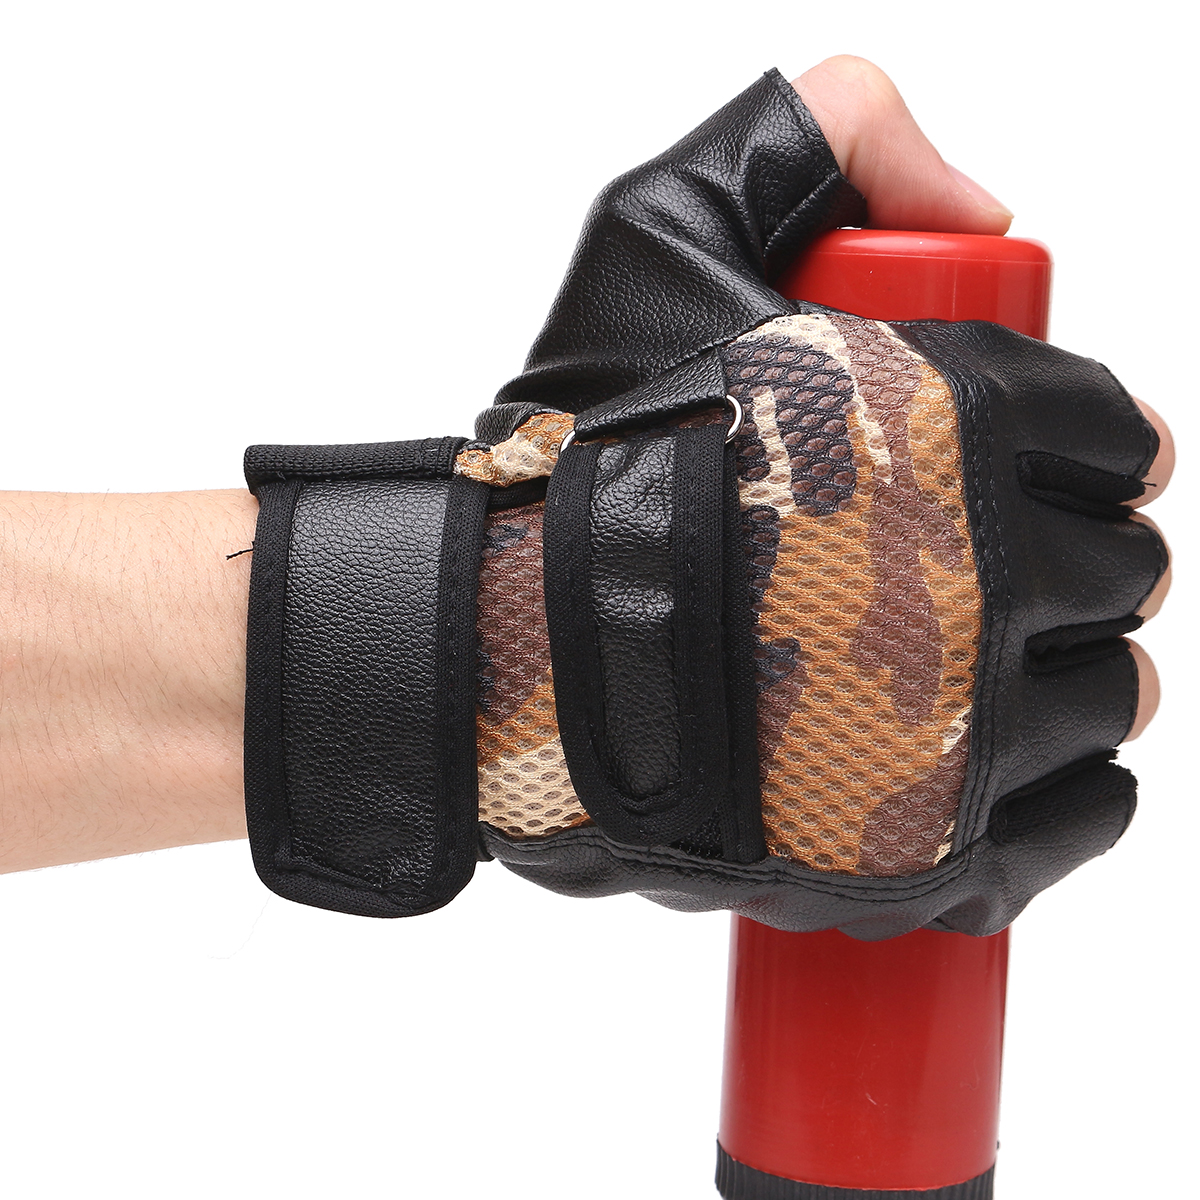 Unisex-Mesh-Artificial-Leather-Cycling-Outdoor-Gloves-Gym-Fitness-Wrist-Support-Wraps-Bike-Mittens-1085963